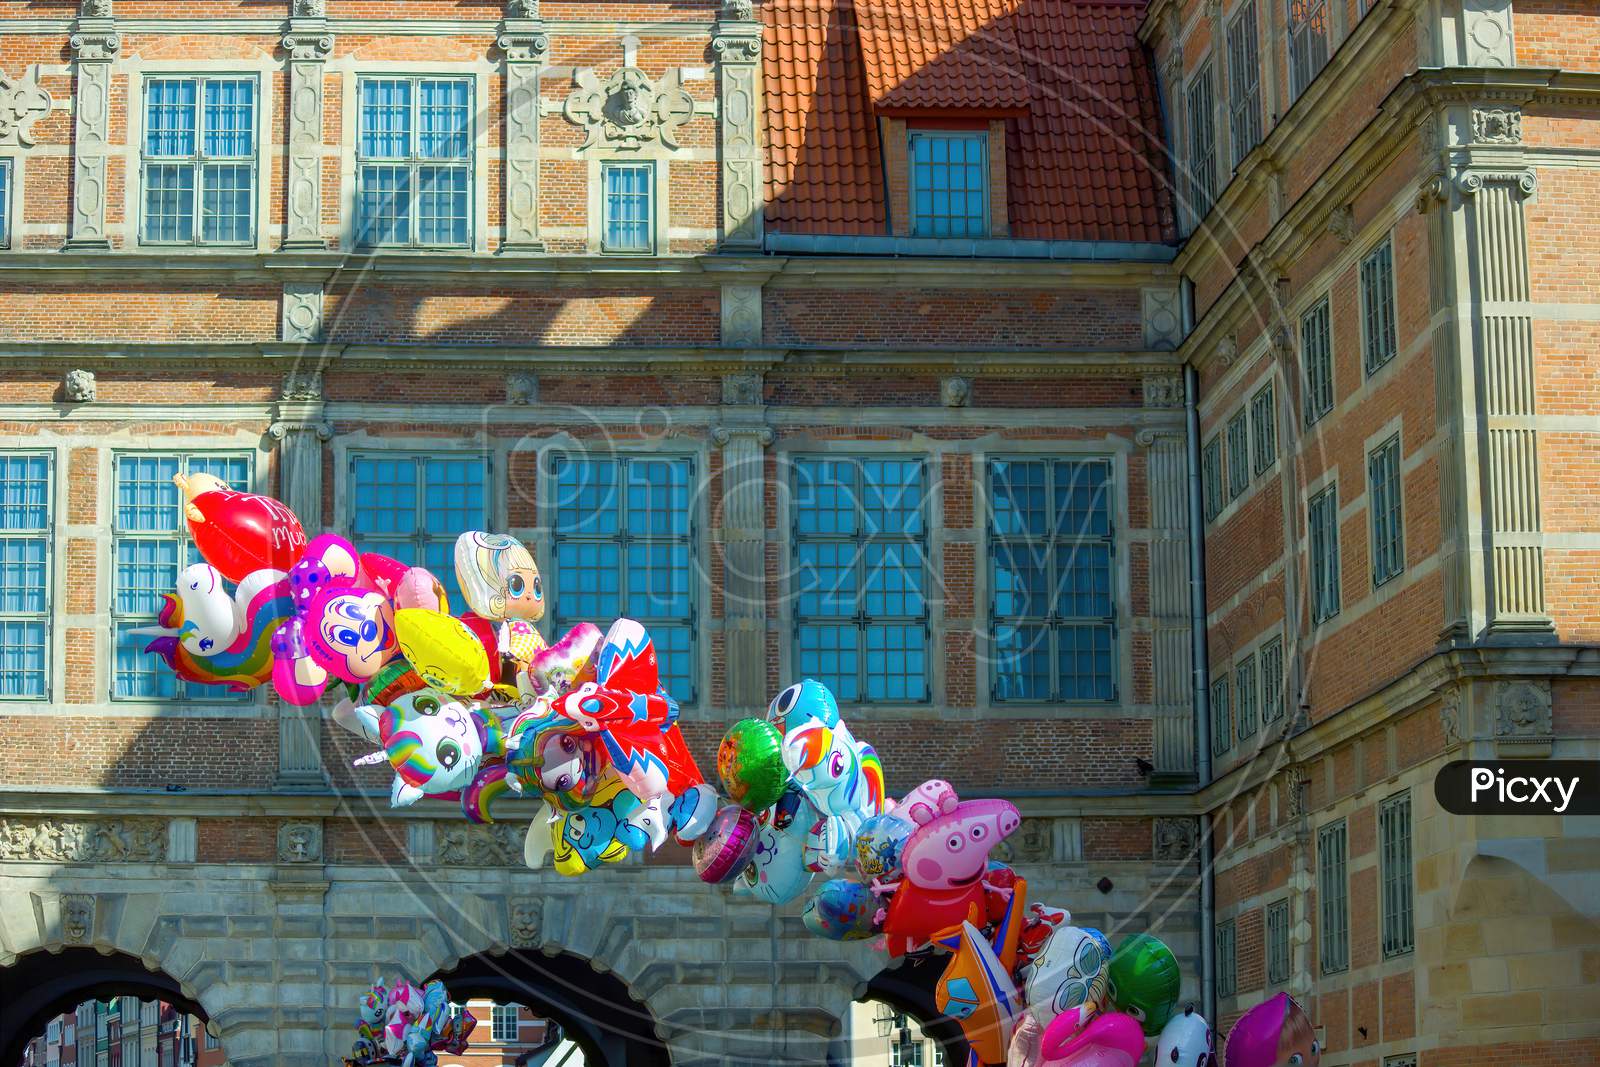 Gdansk, Poland: Bunch Of Balloons In The Shape Of Cartoons Floating In The Street Alley At Old Town Of City Center Main Square